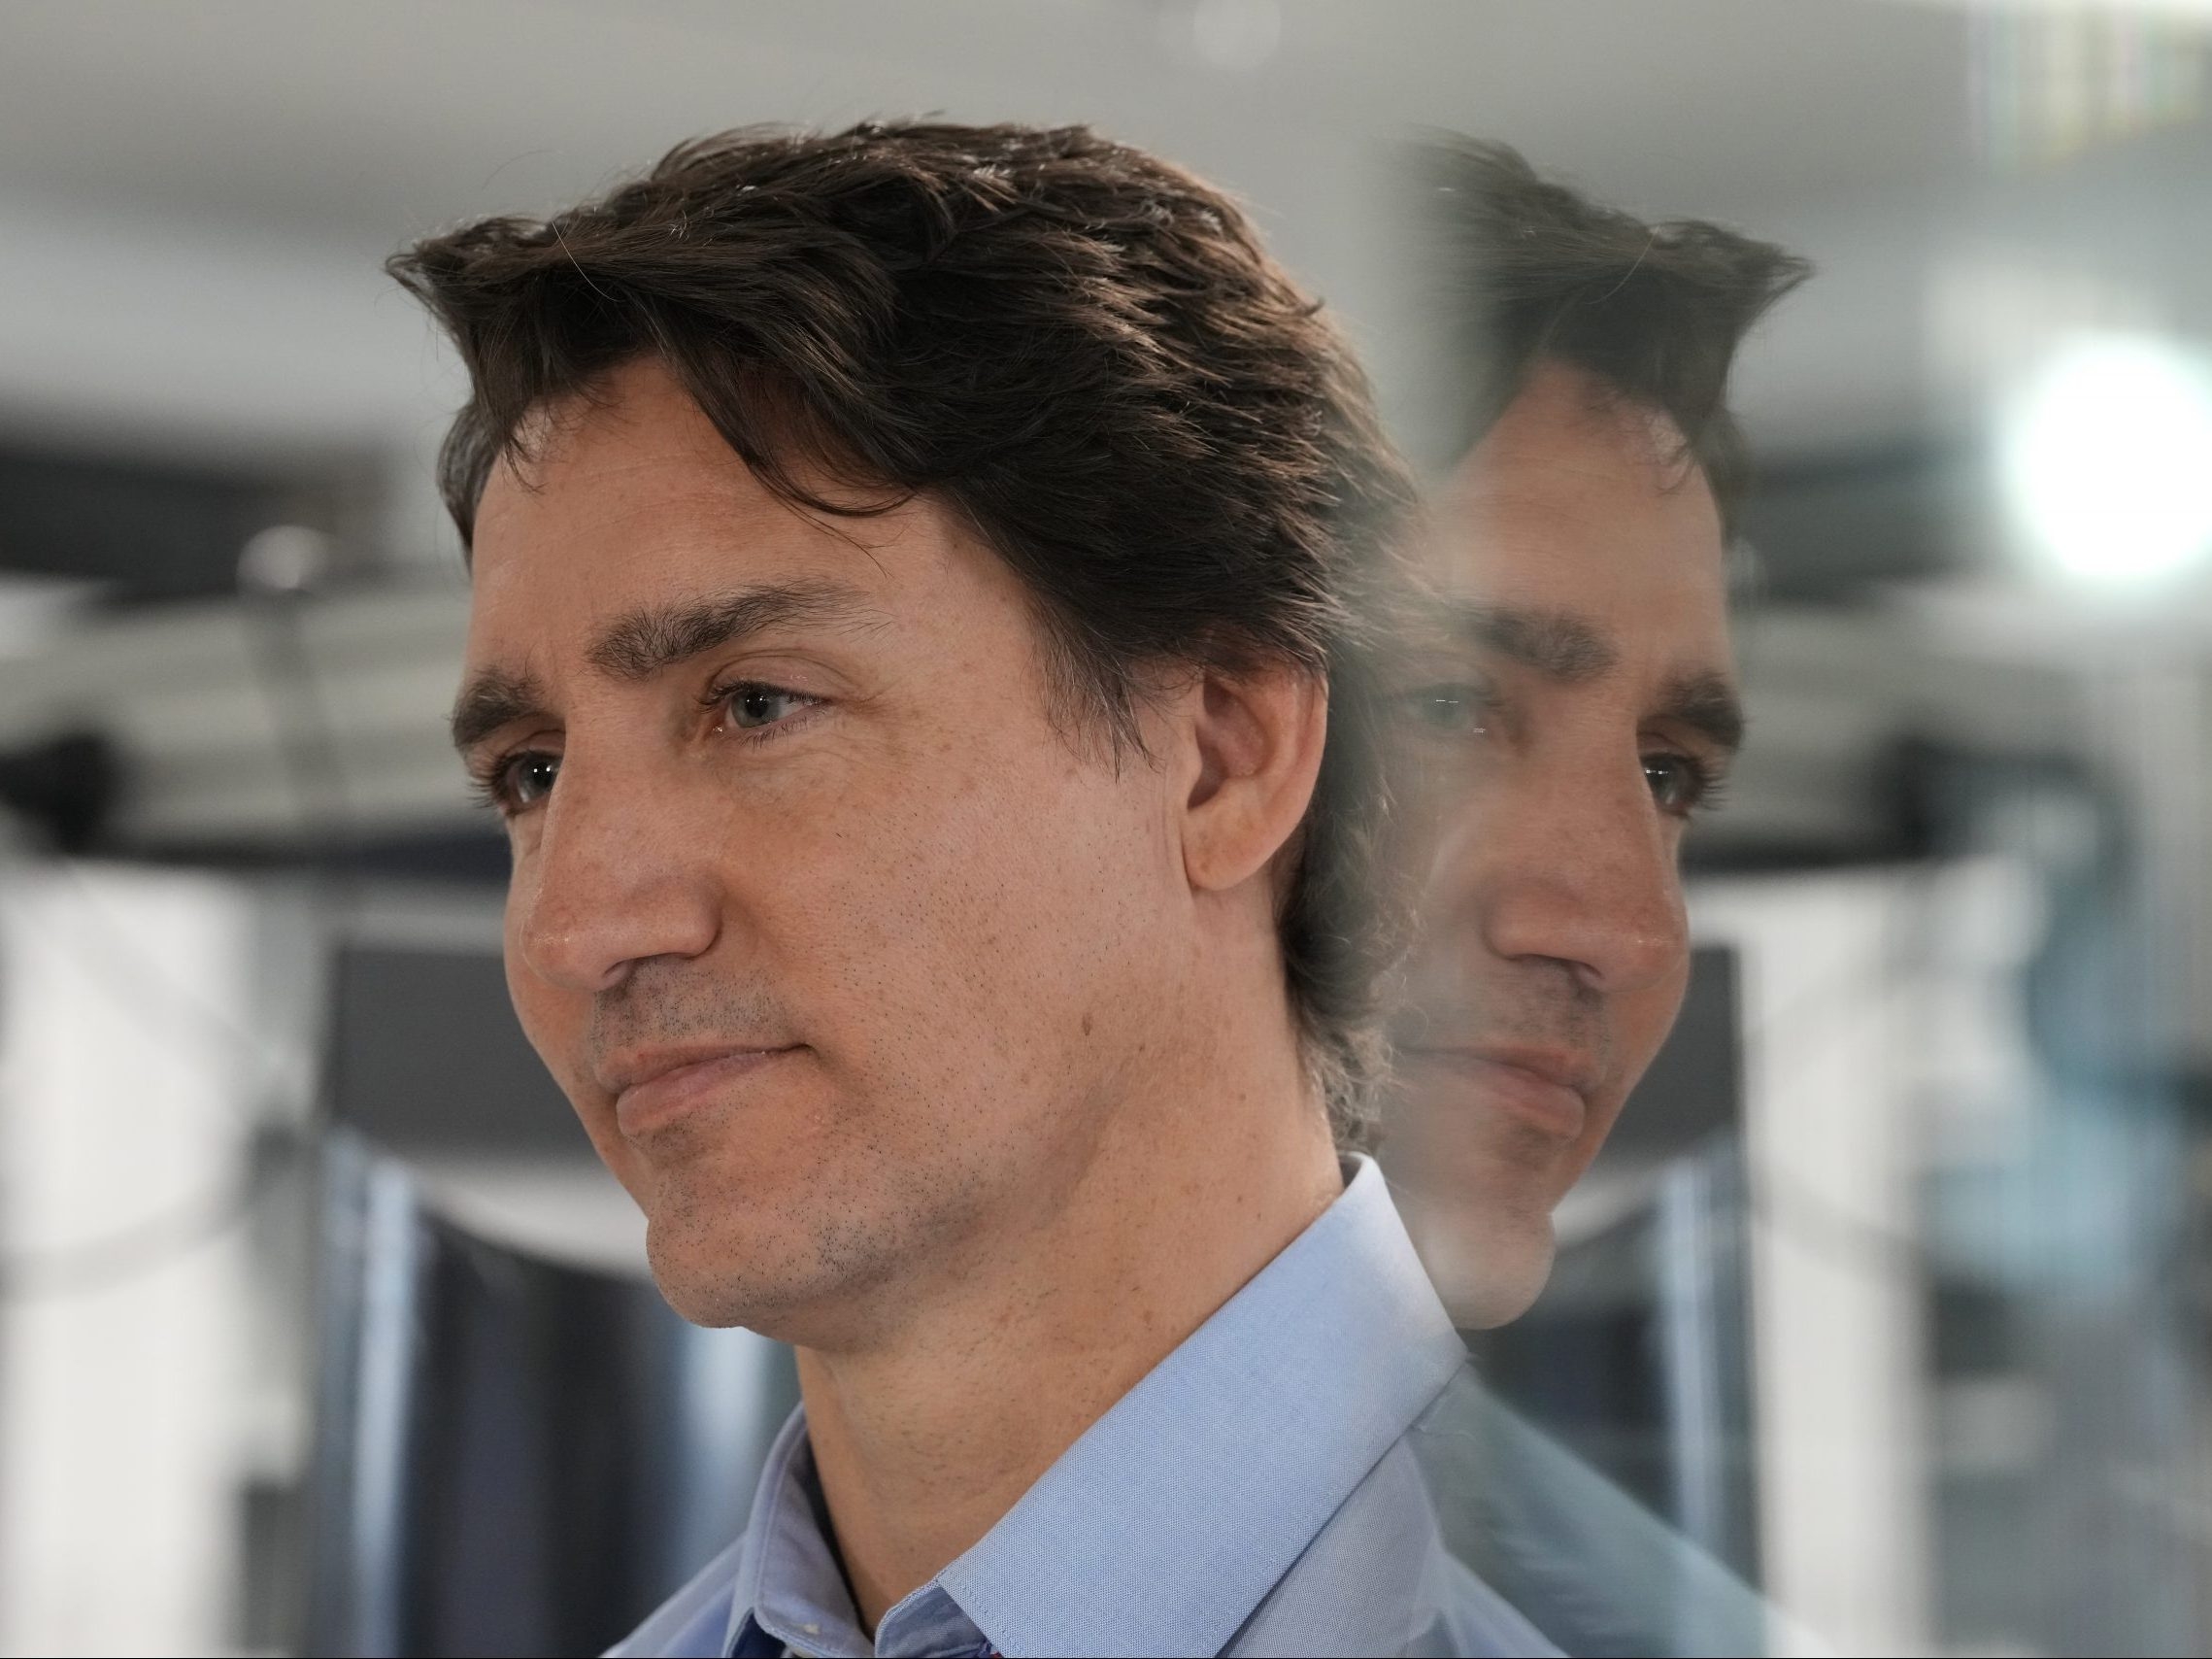 LILLEY UNLEASHED: Trudeau calls himself a protector of fundamental freedoms